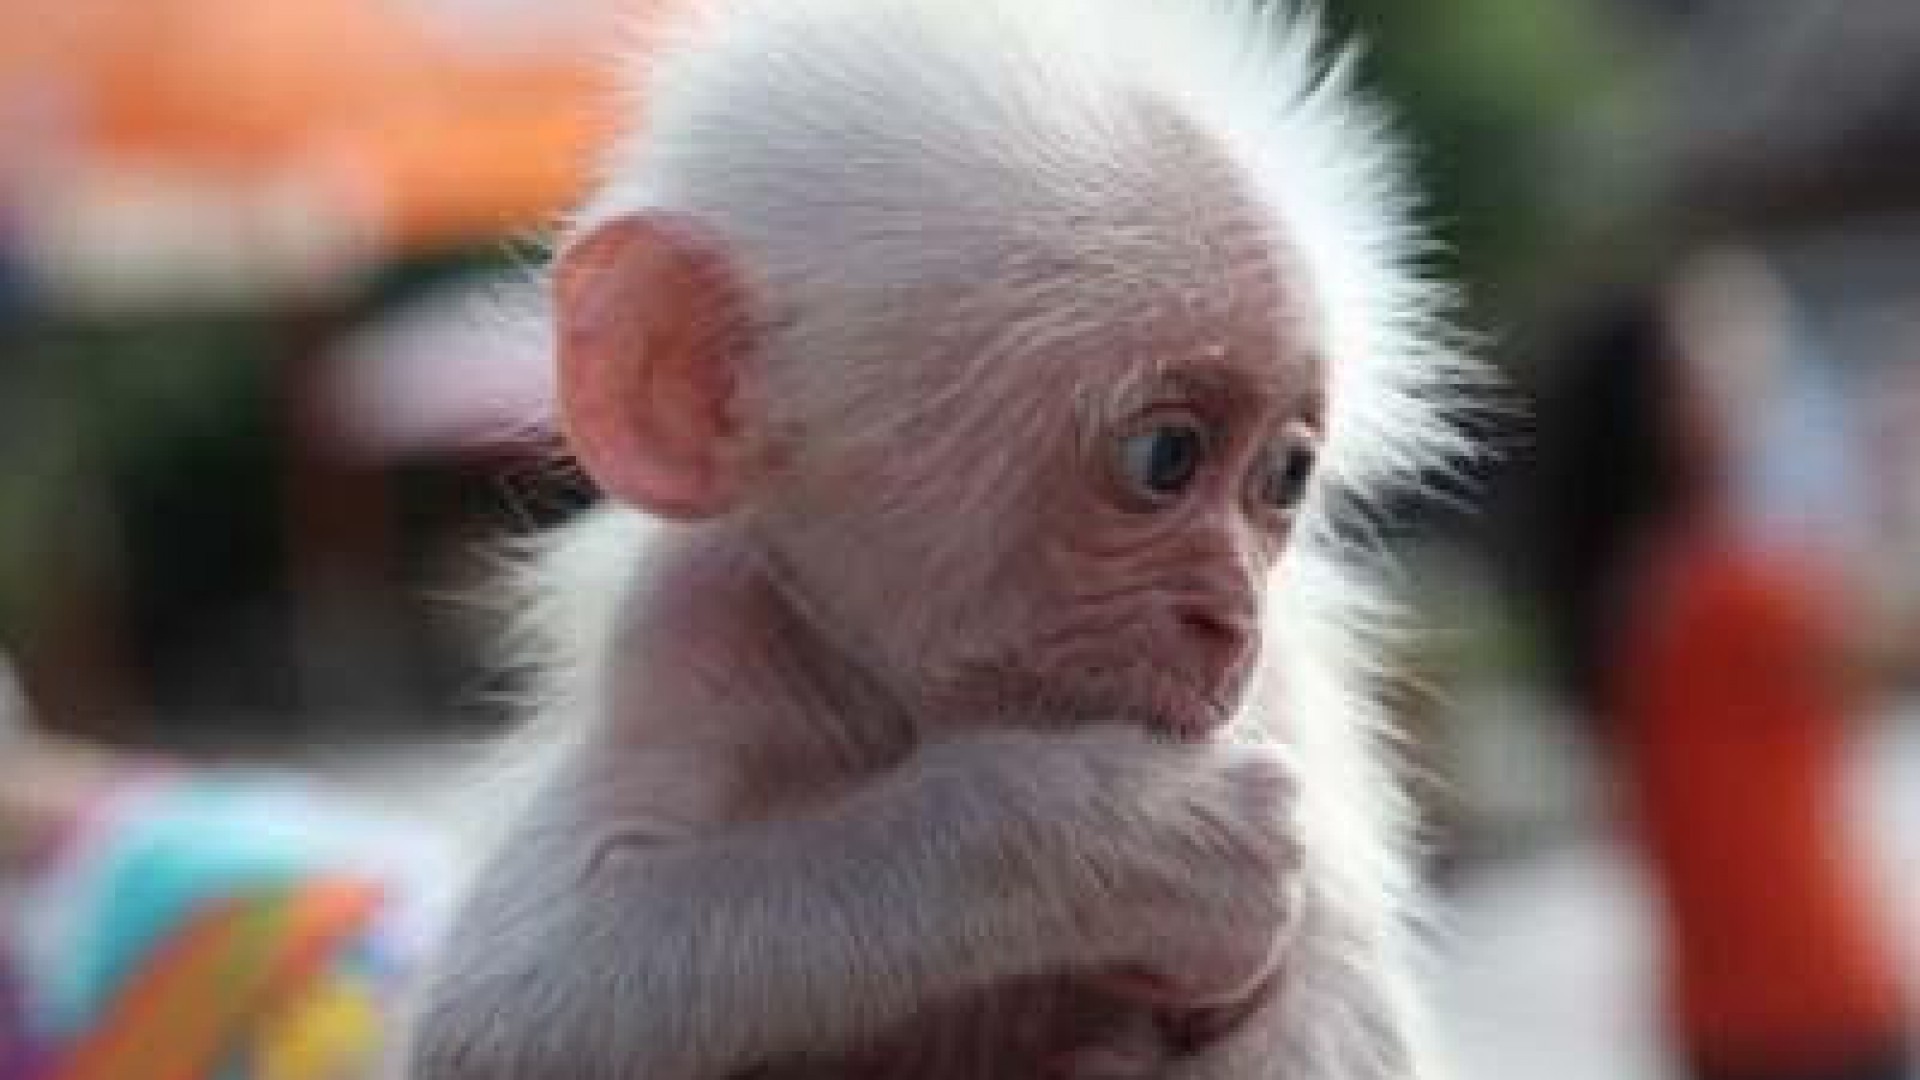 Hd Images, Hd Pictures, Backgrounds, Desktop Wallpapers - Albino Chimpanzee Baby - HD Wallpaper 